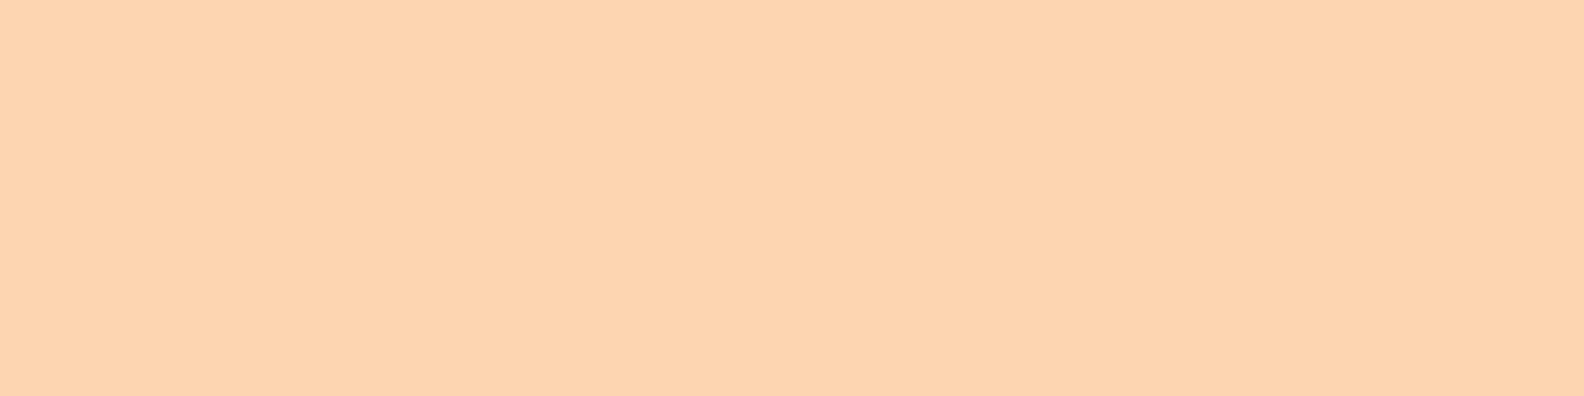 1584x396 Light Apricot Solid Color Background